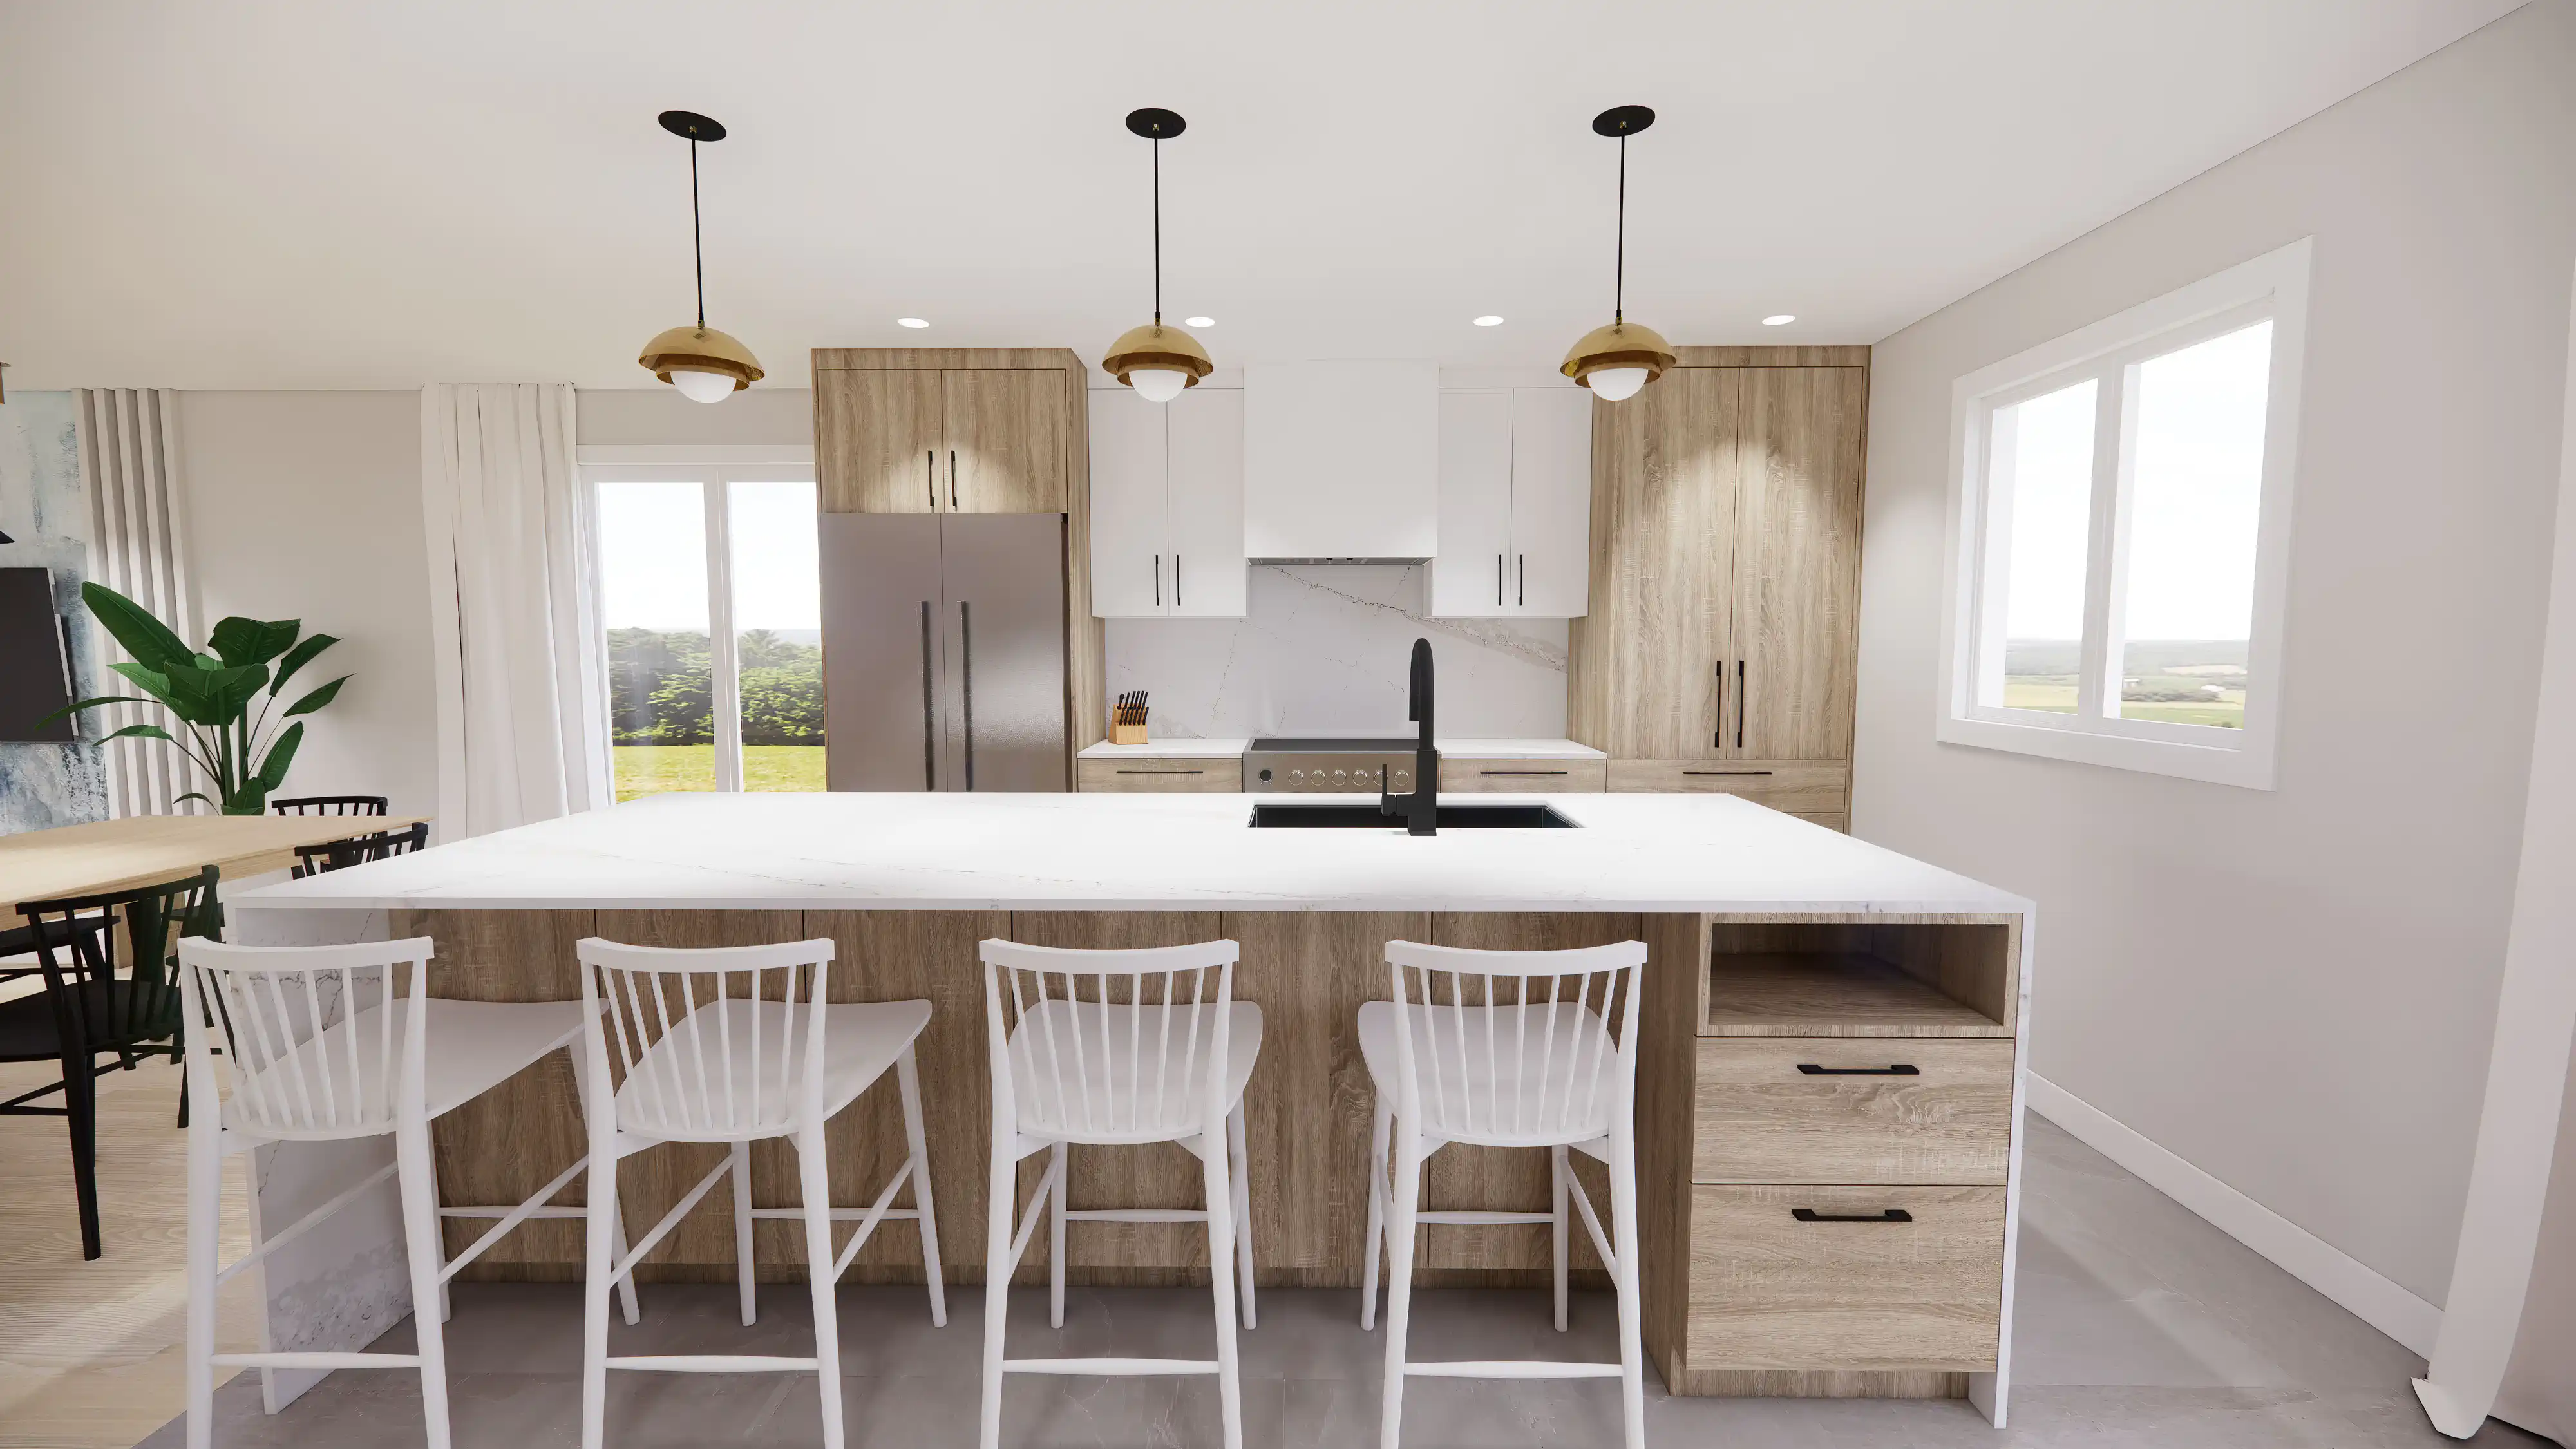 Contemporary kitchen with wooden cabinetry, a central marble island, and hanging tiered pendant lights, interior by Sarah Brown Design